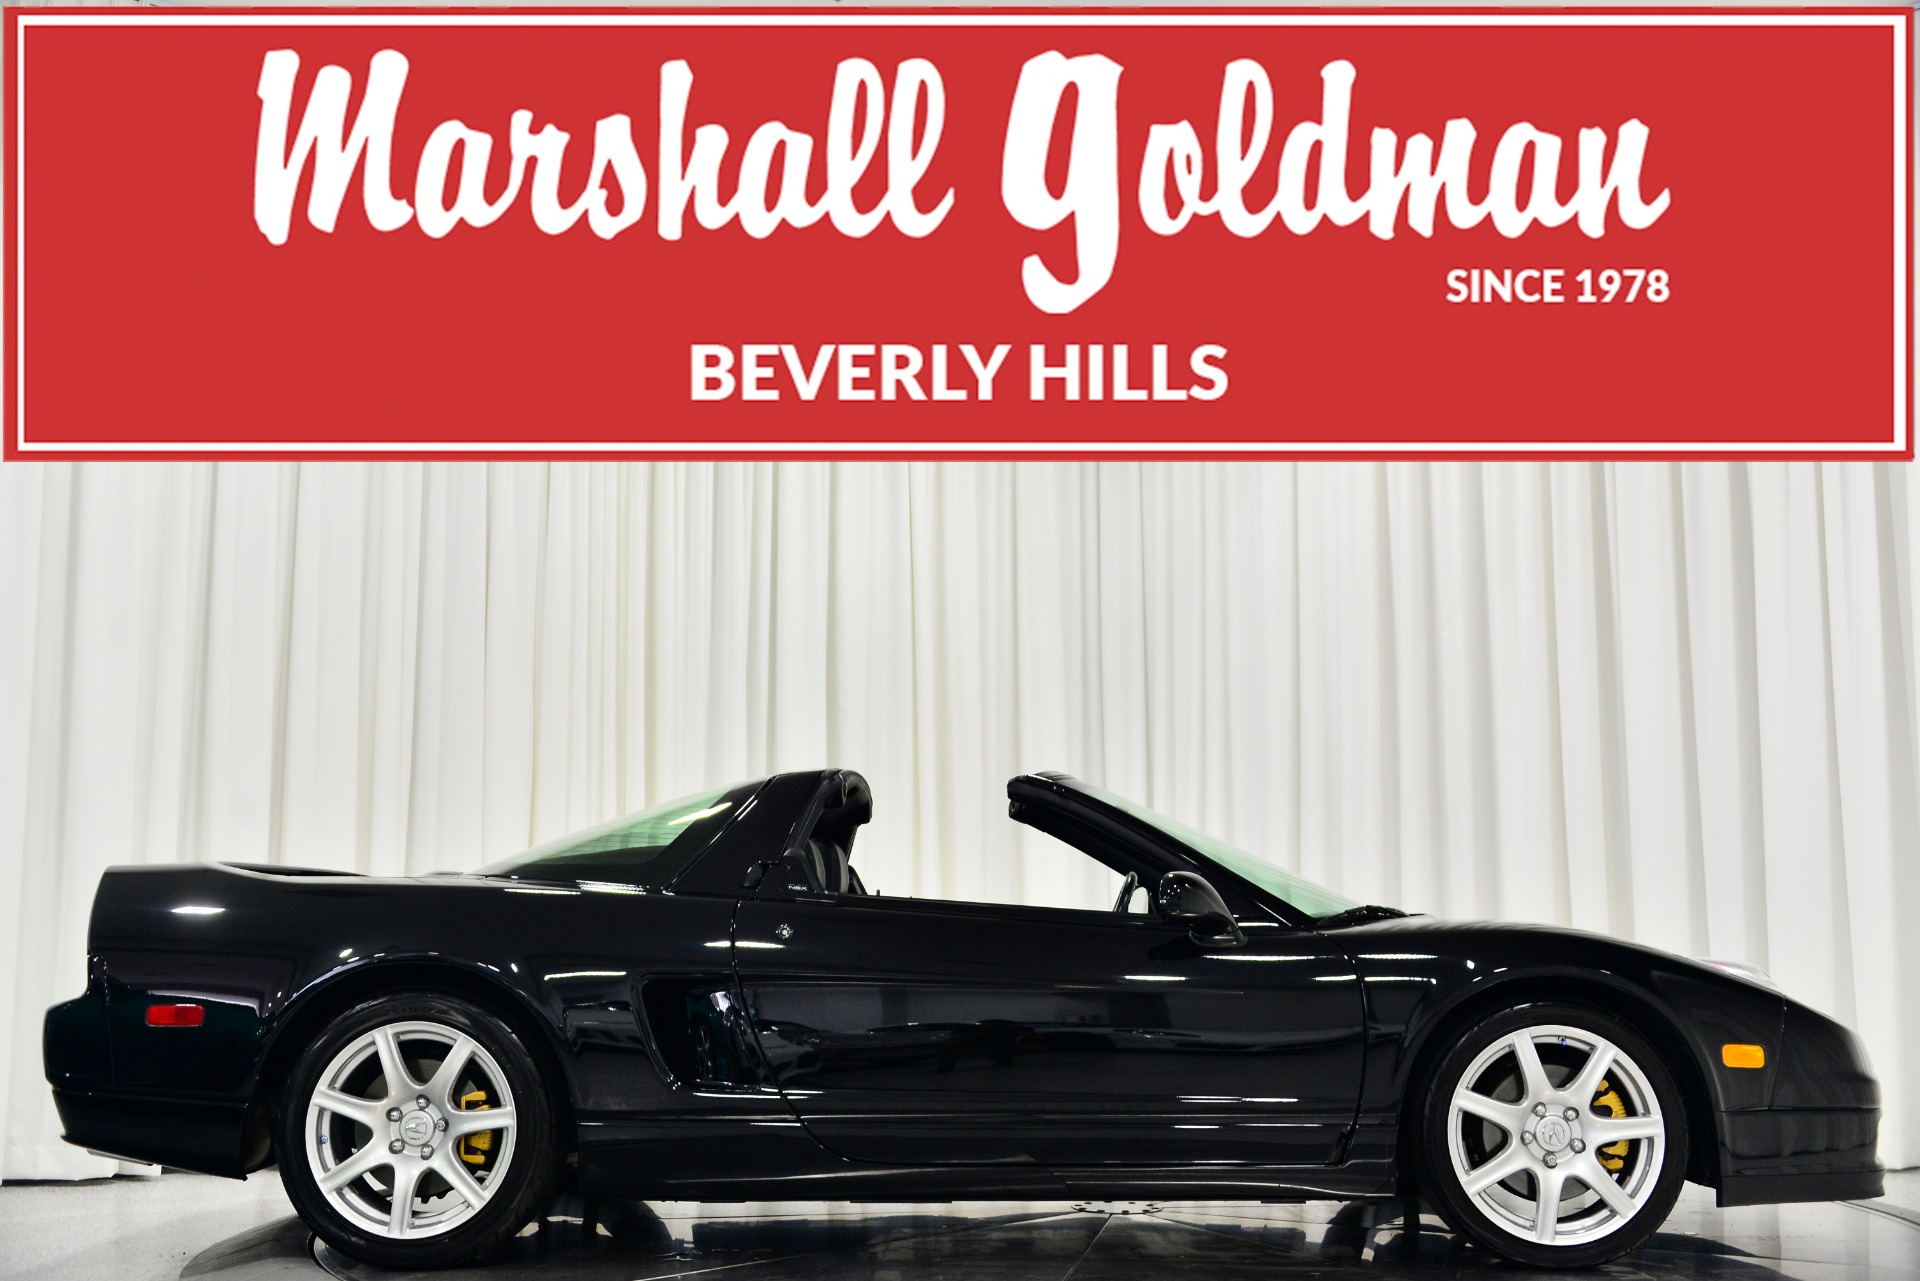 Used 2005 Acura Nsx T For Sale Sold Marshall Goldman Cleveland Stock B20790